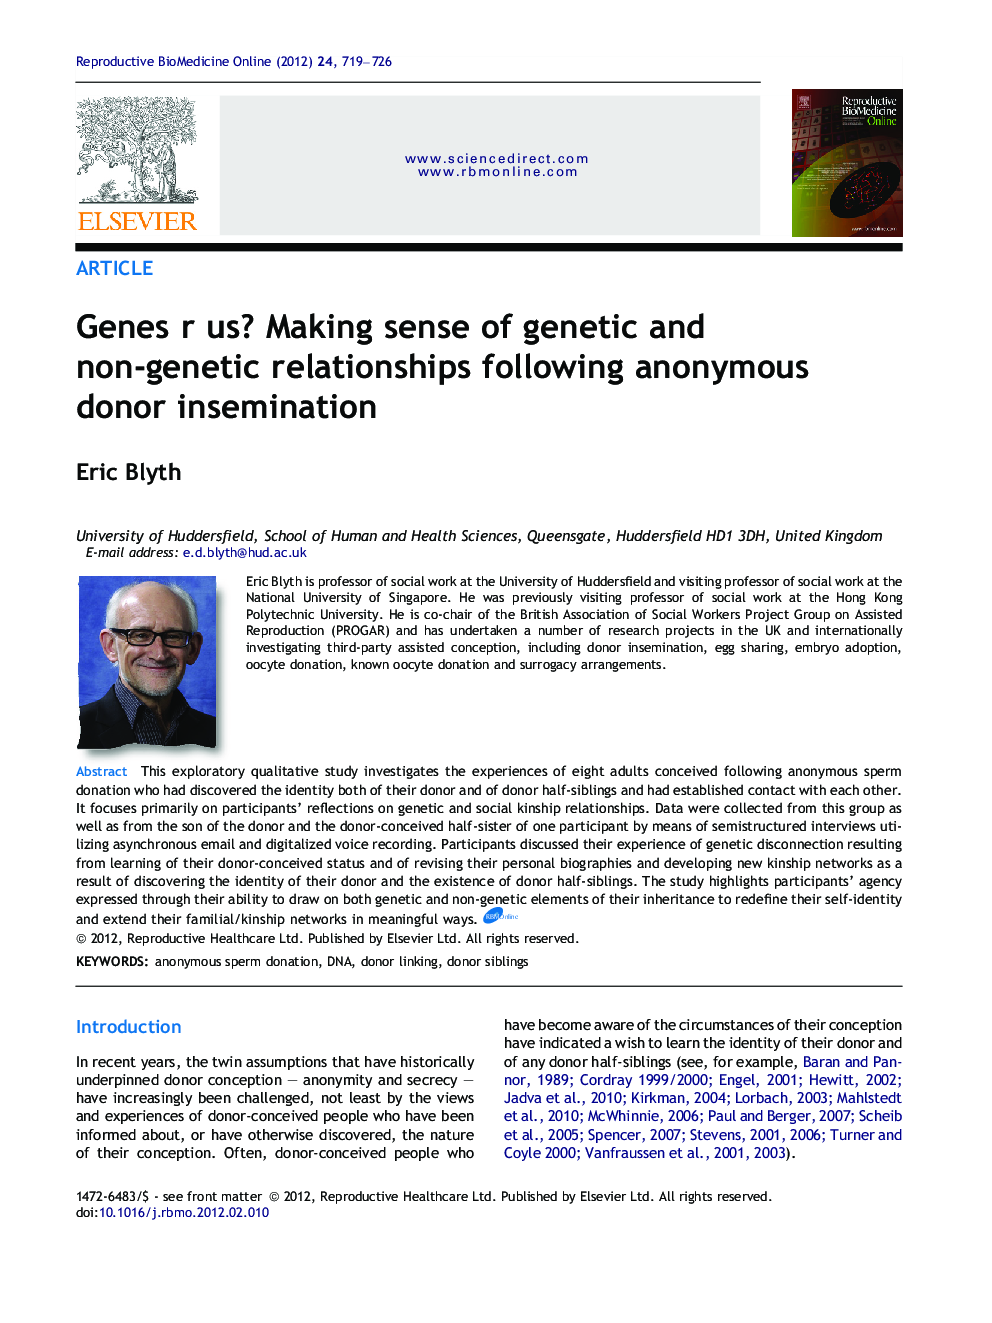 Genes r us? Making sense of genetic and non-genetic relationships following anonymous donor insemination 